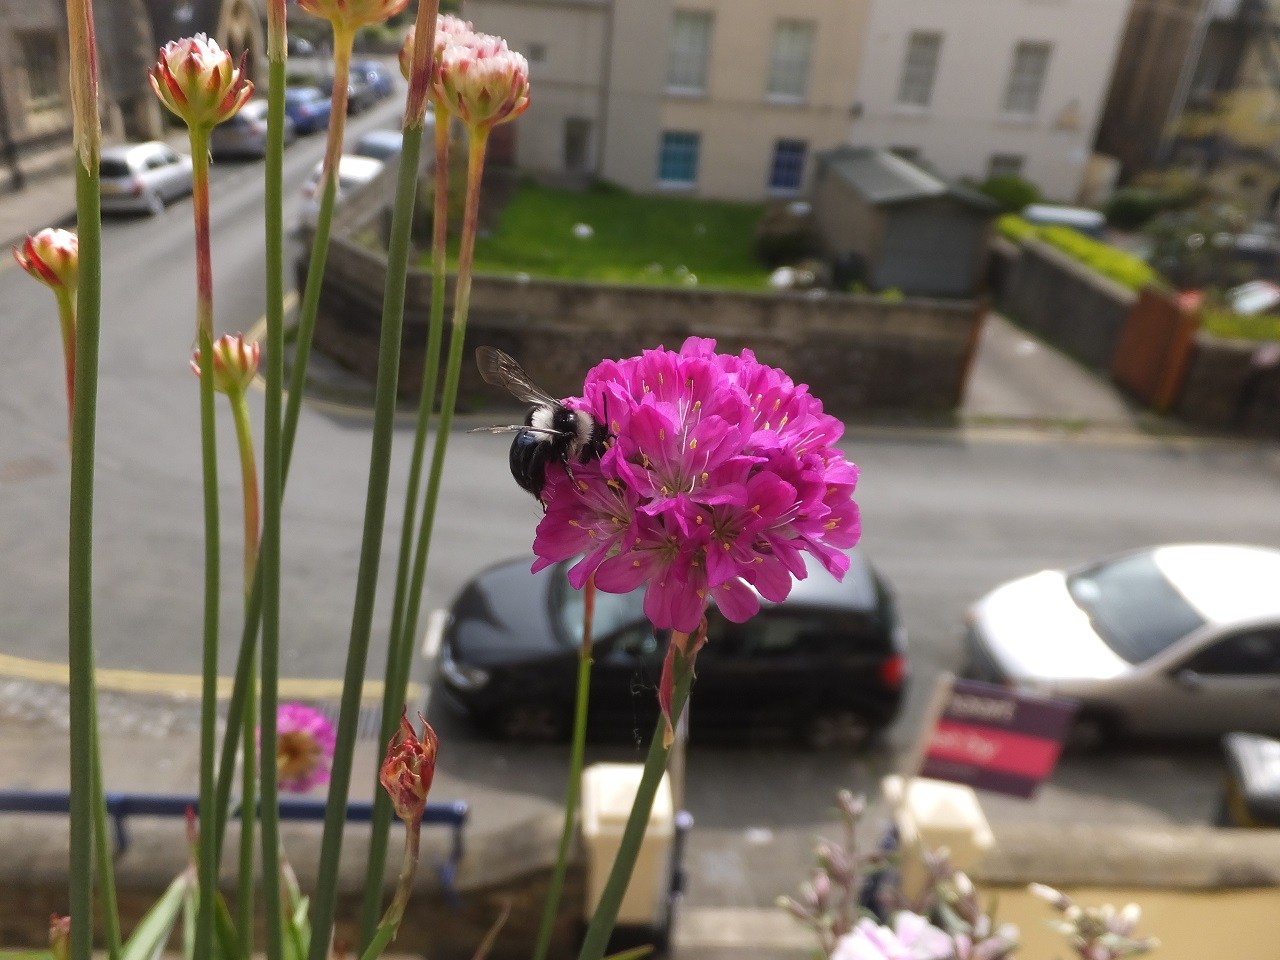 Home Gardens Crucial to Survival of Urban Bees